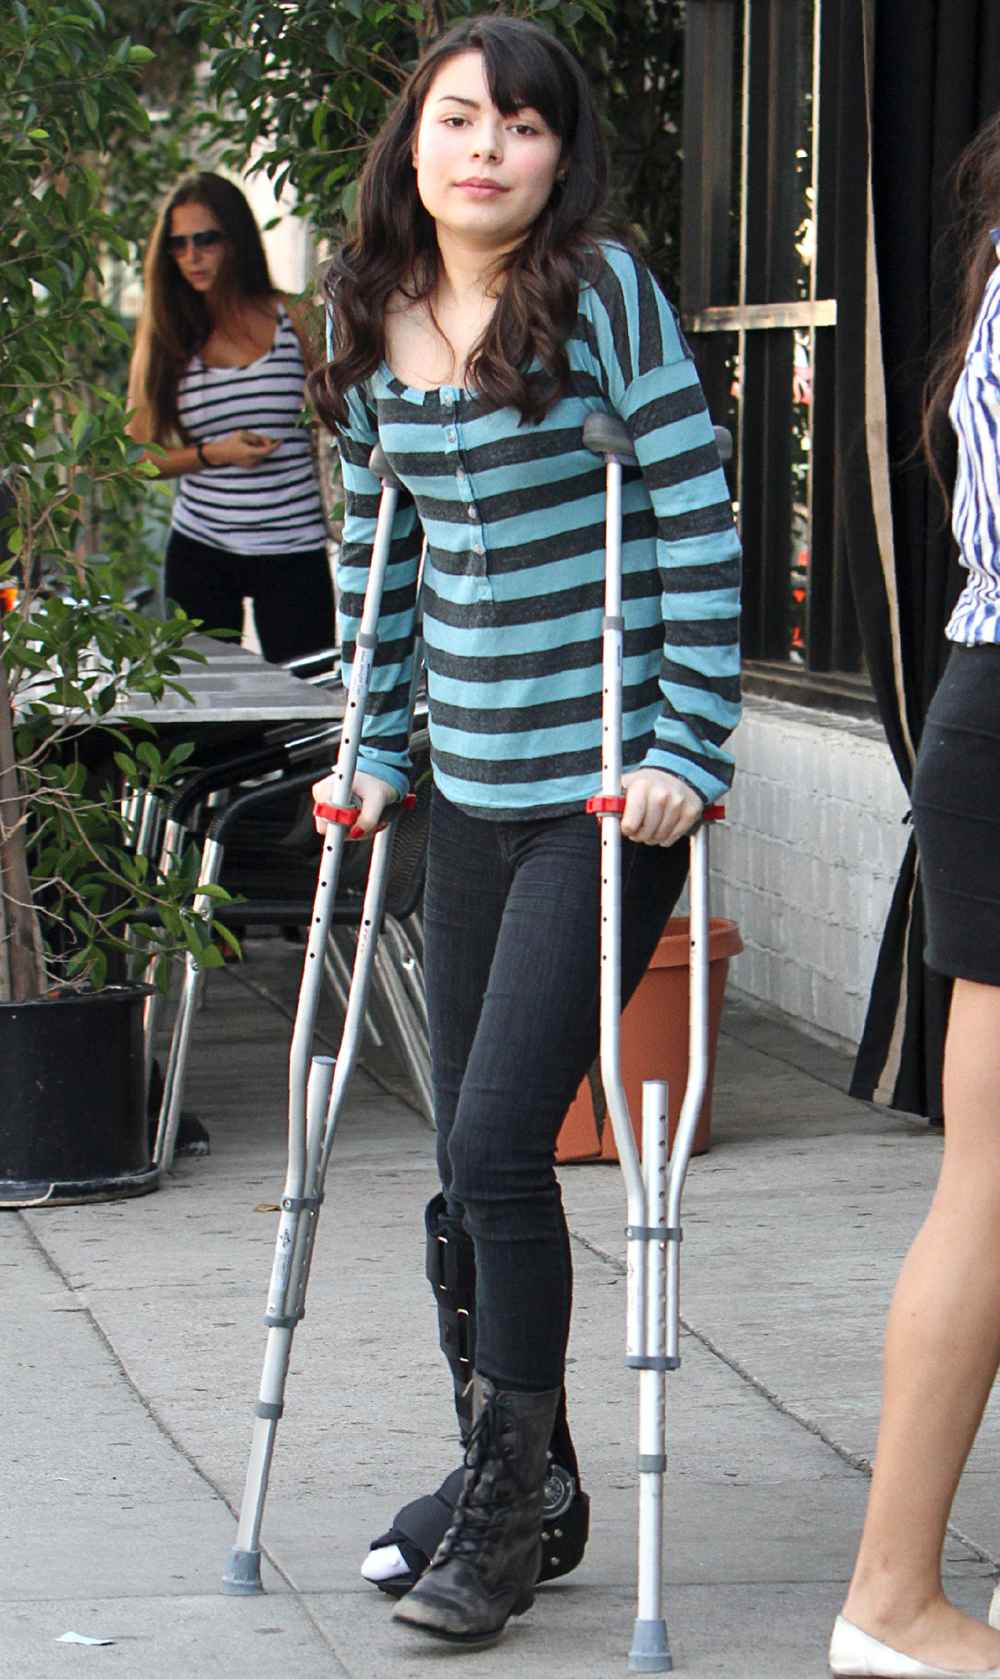 Miranda Cosgrove Once Had a 'Mystery' Hole in Her Leg After a 2011 Bus Crash Injury